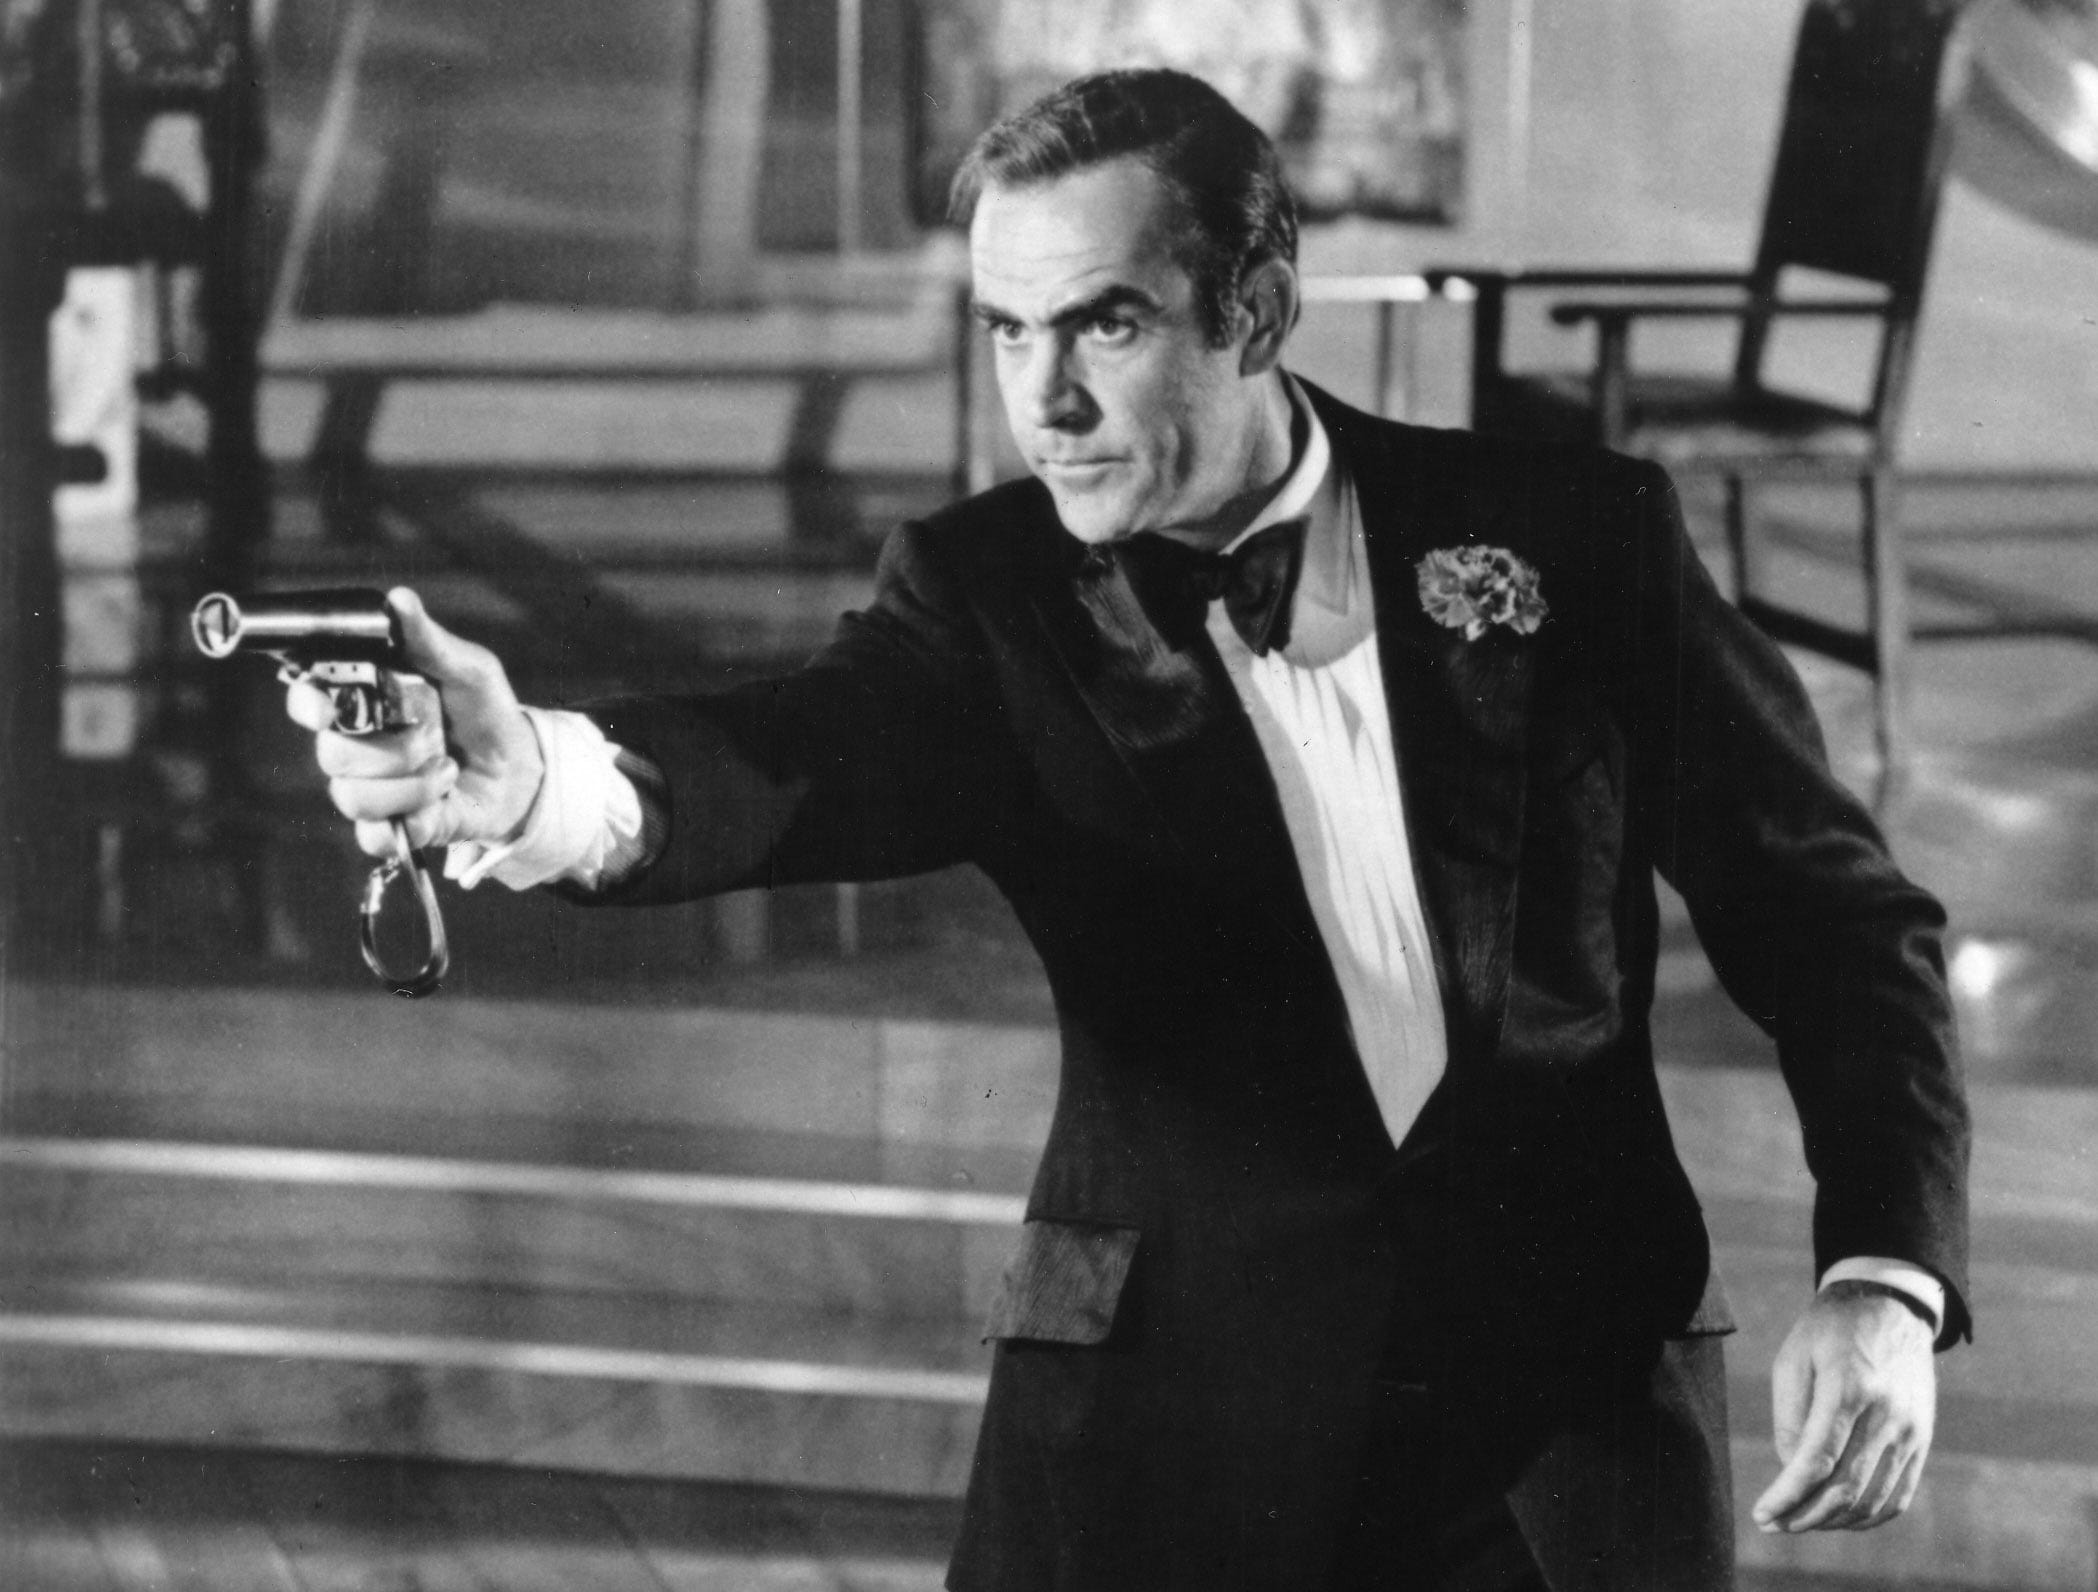 Sean Connery, iconic James Bond actor, and Oscar winner, dead at 90